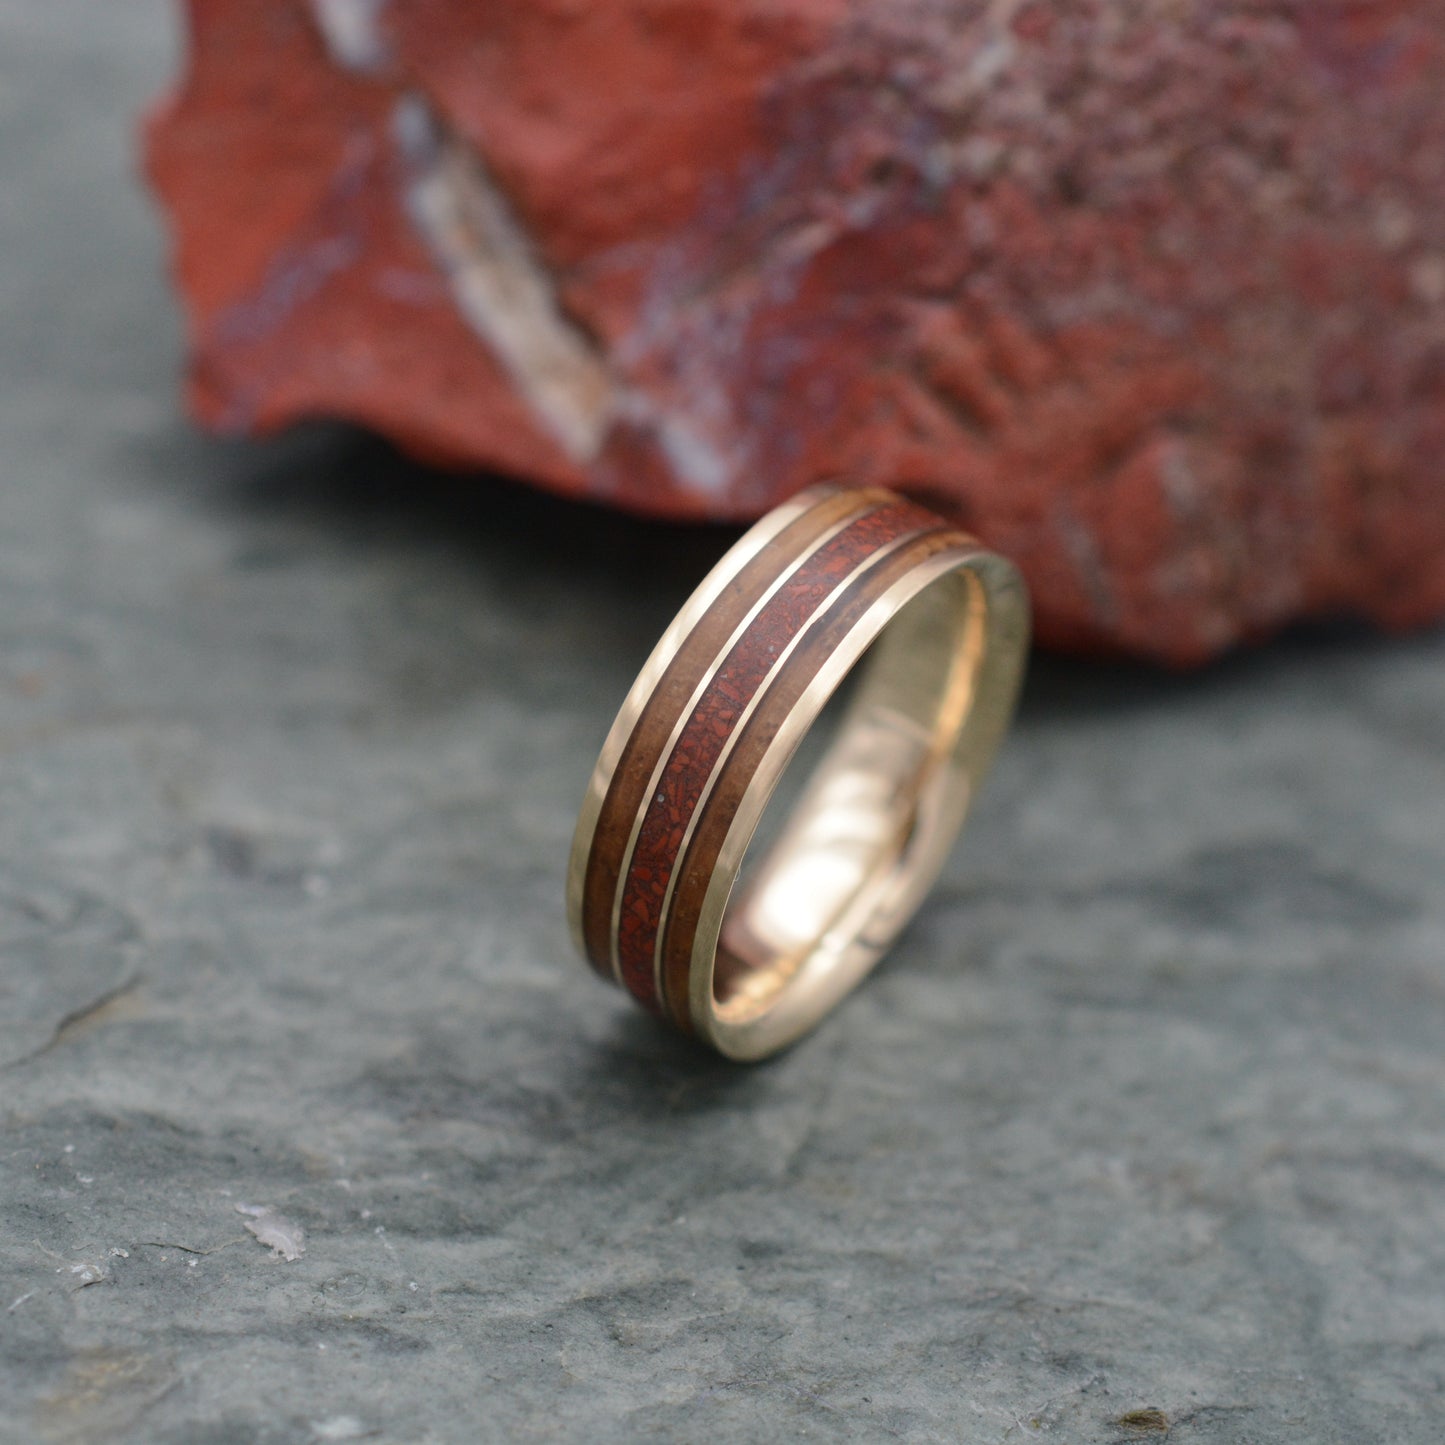 a gold wedding band with a striped design